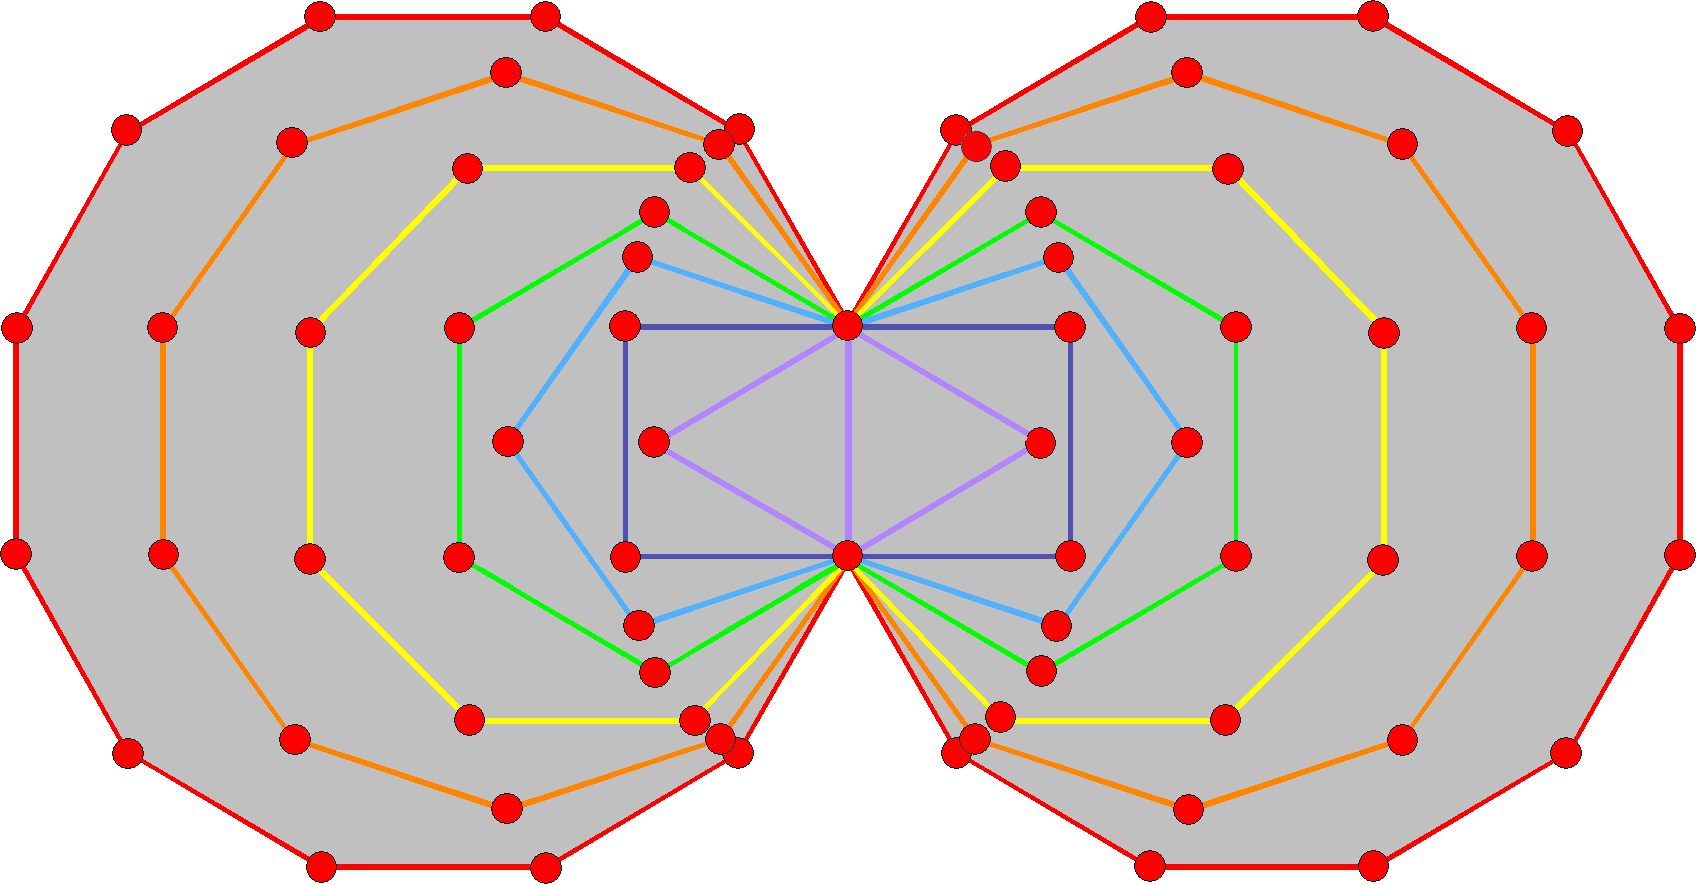 70 corners of polygons in inner Tree of Life